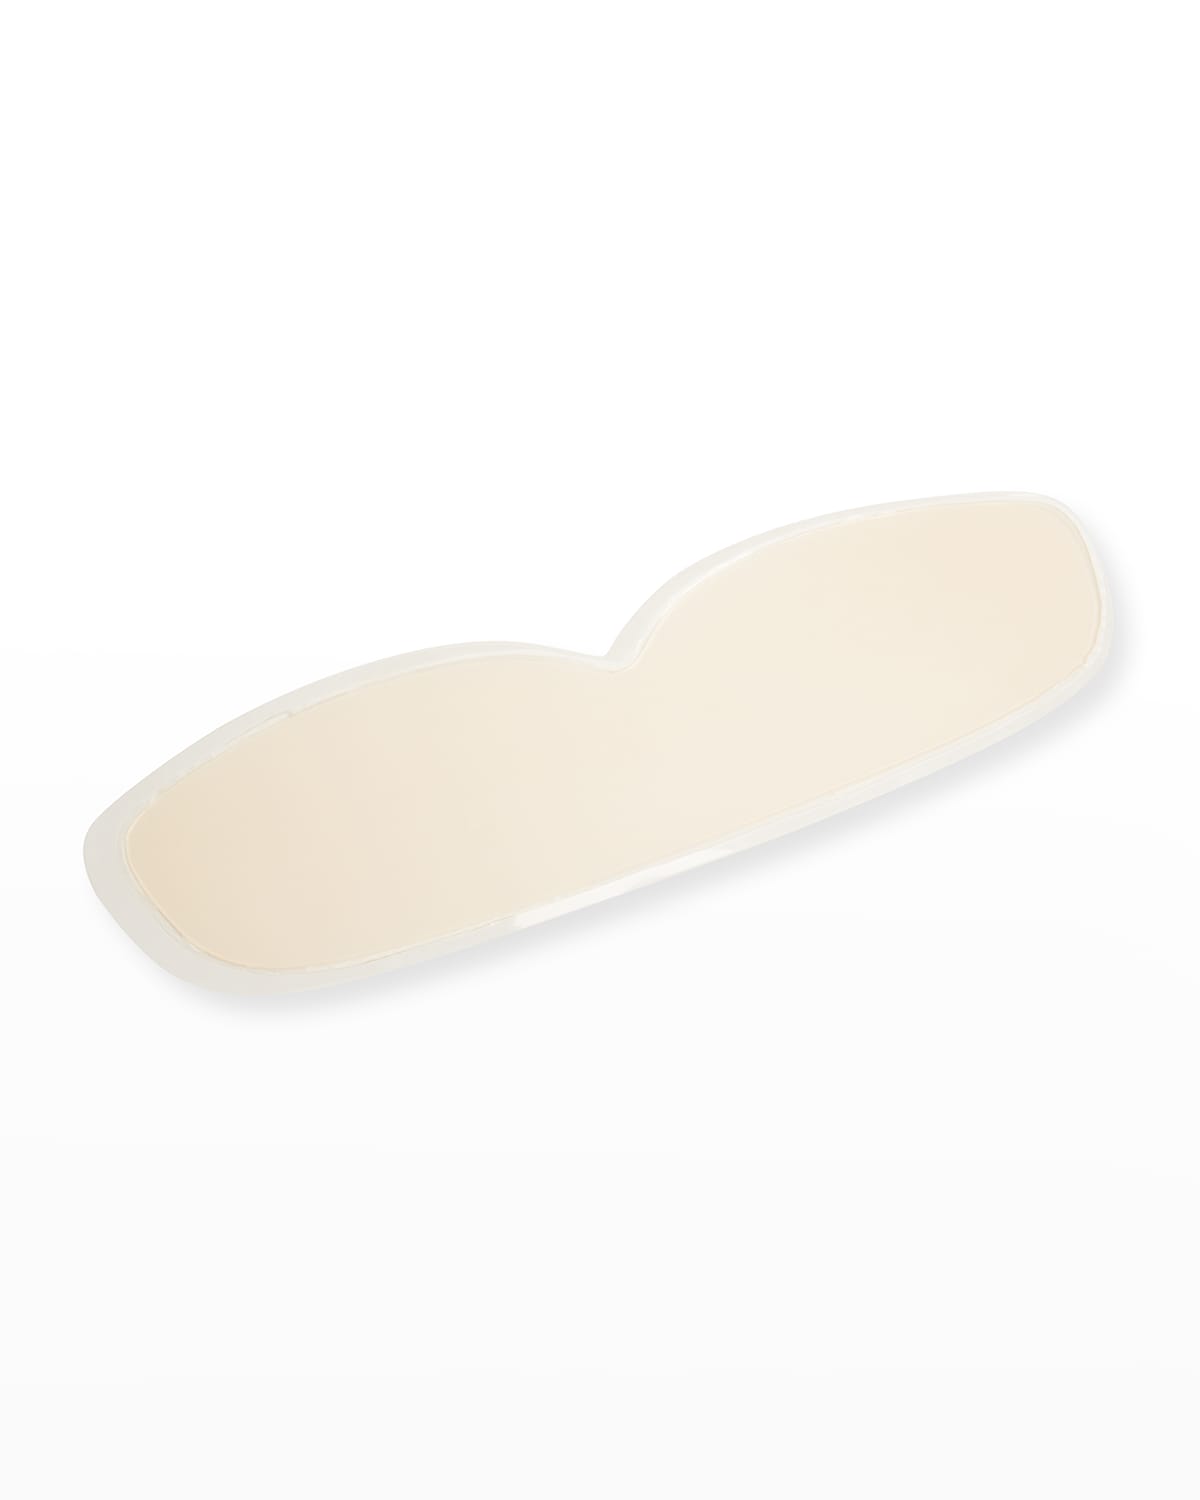 Fashion Forms Silicone Skin Bandeau - New Packaging